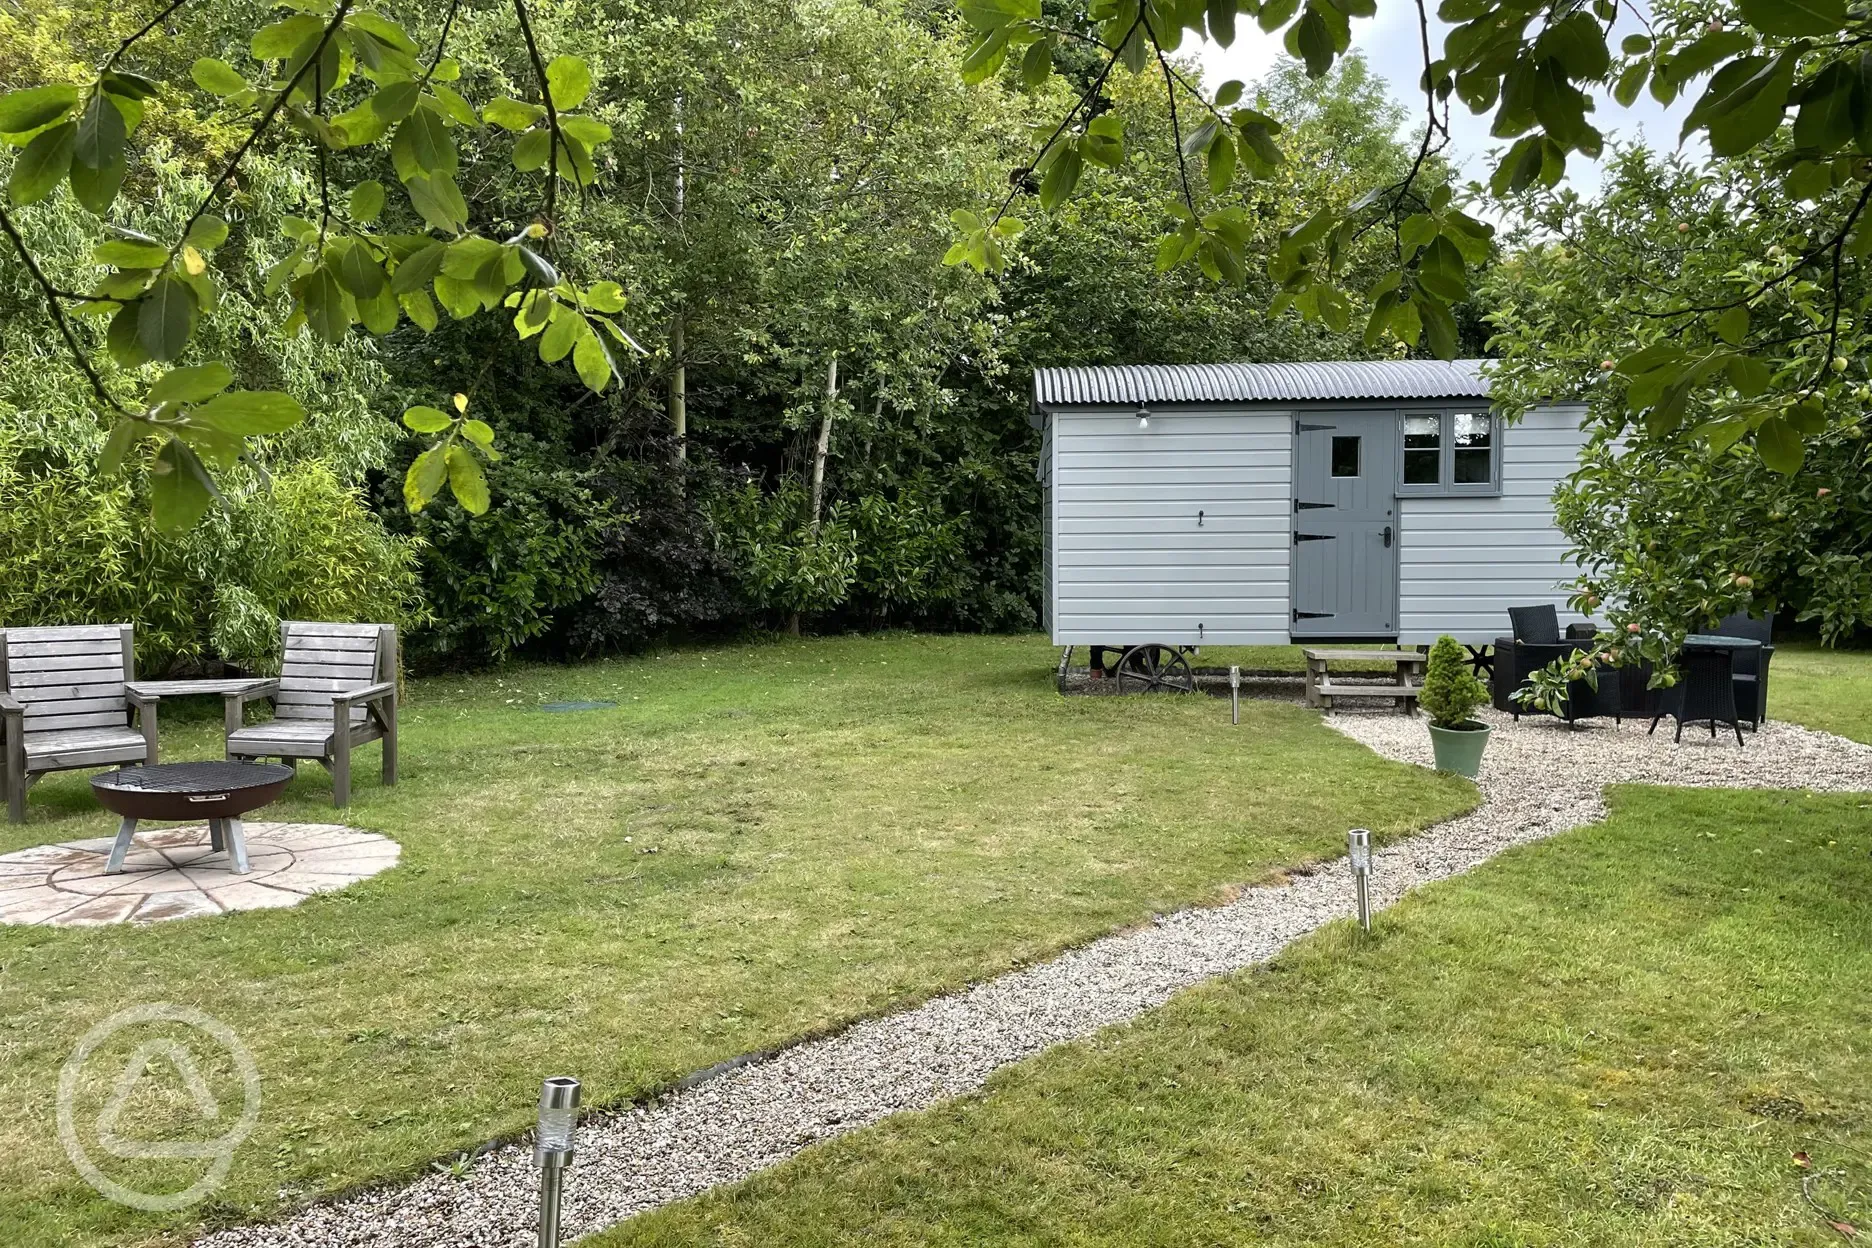 Shepherd's hut and outdoor seating area